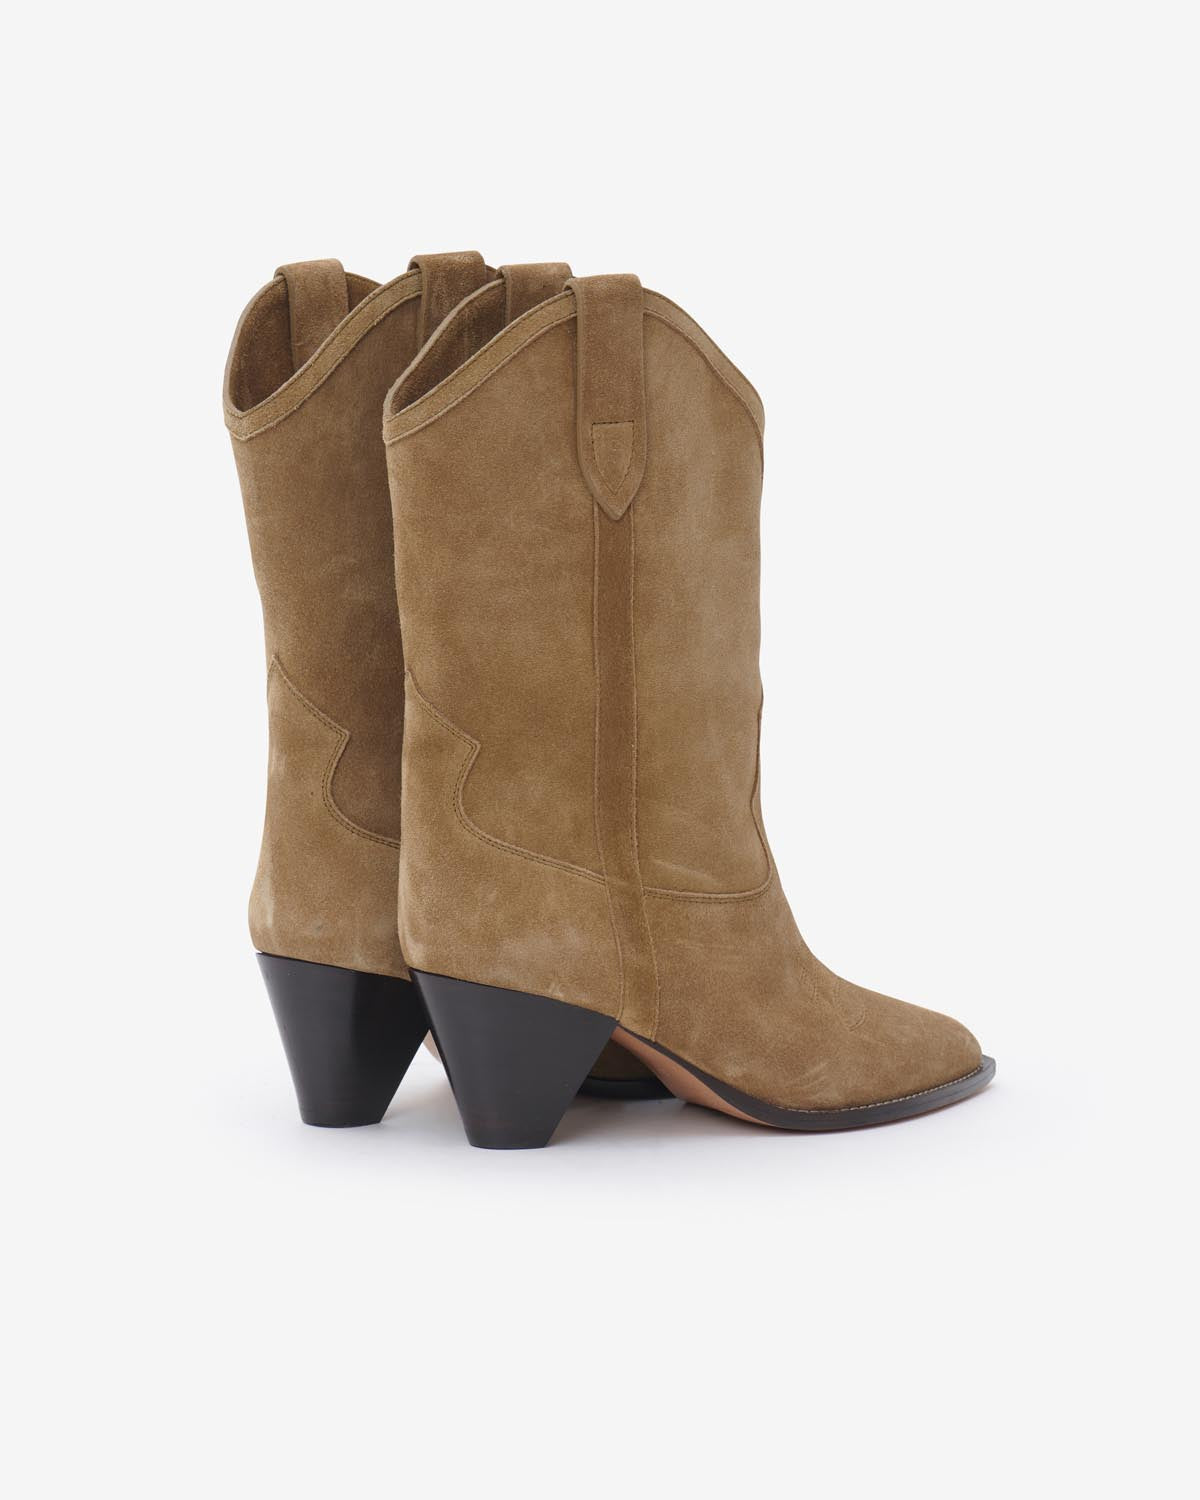 Boots luliette Woman Taupe 2